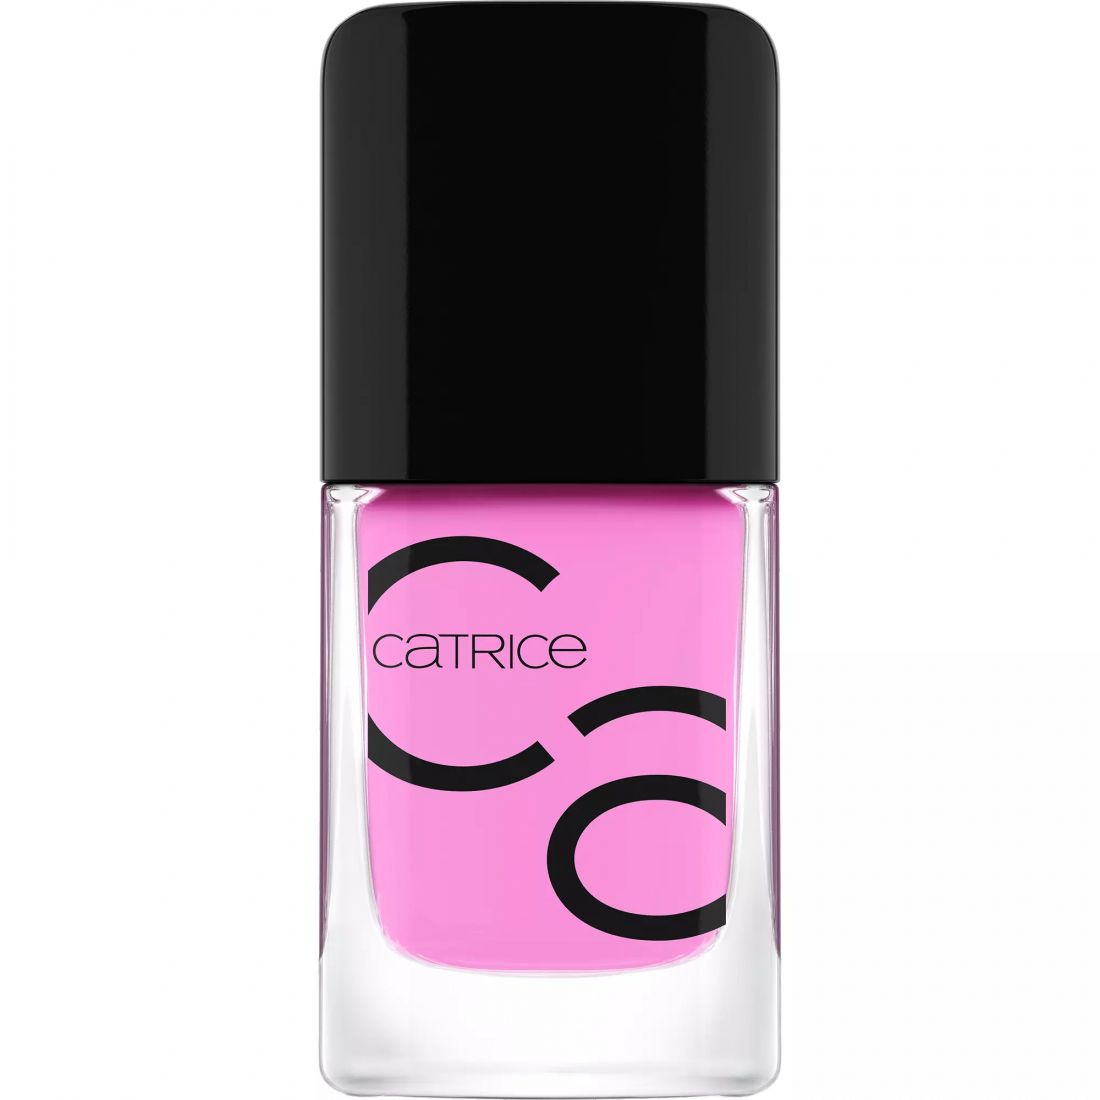 Catrice - Vernis à ongles en gel 'Iconails' - 135 Doll Side Of Life 10.5 ml